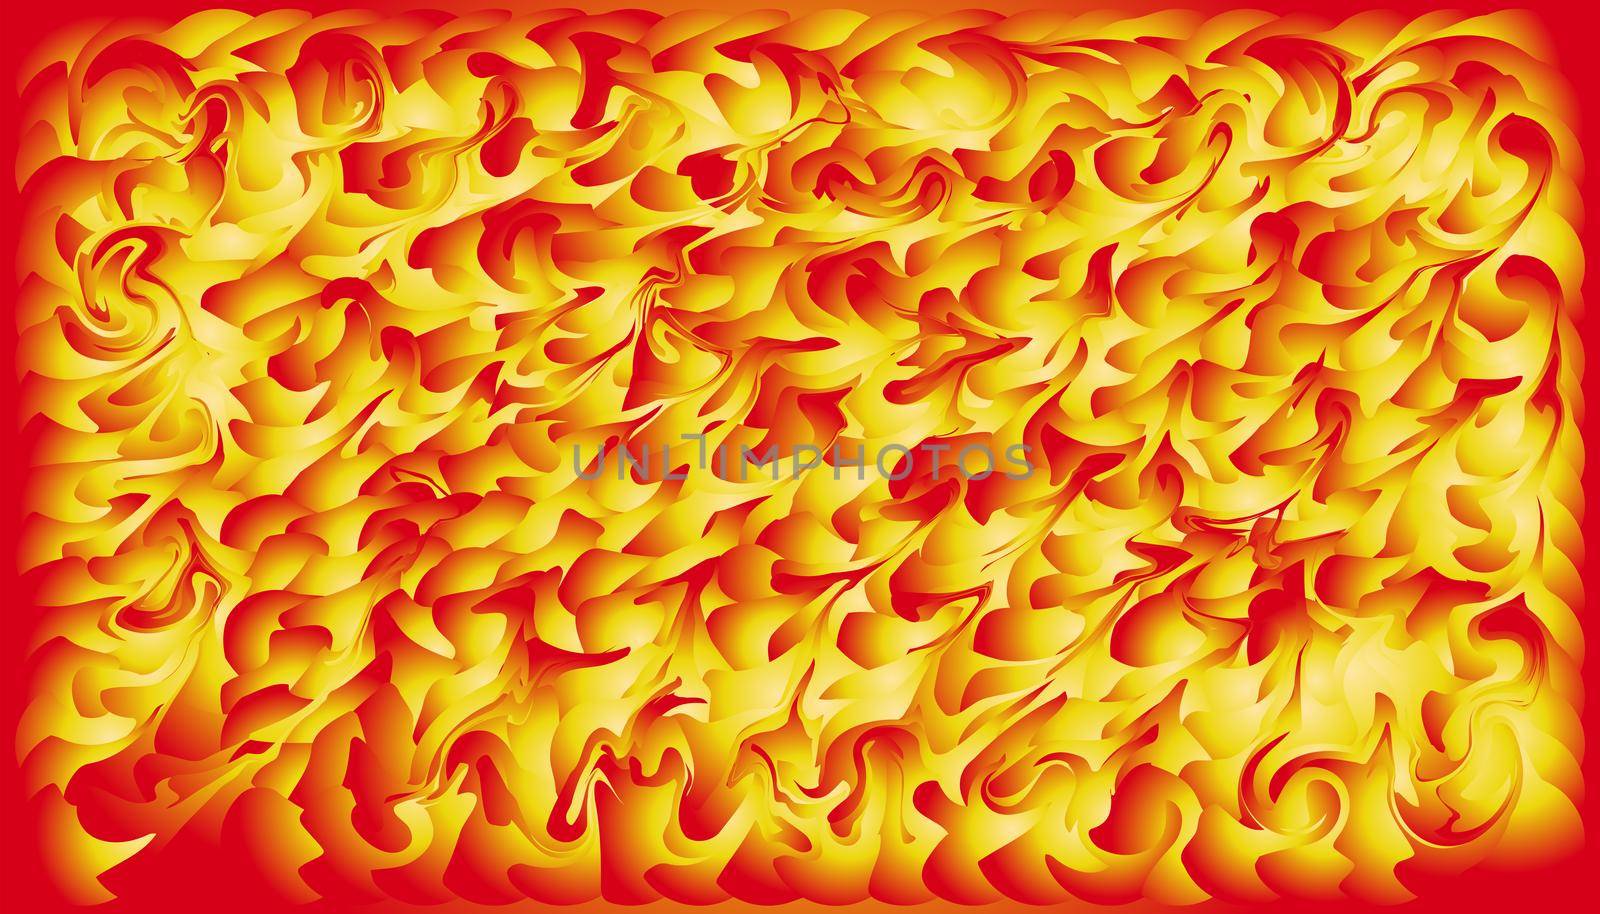 abstract twirl blend like fire blaze element. colorful beautiful background design. vector illustration eps10